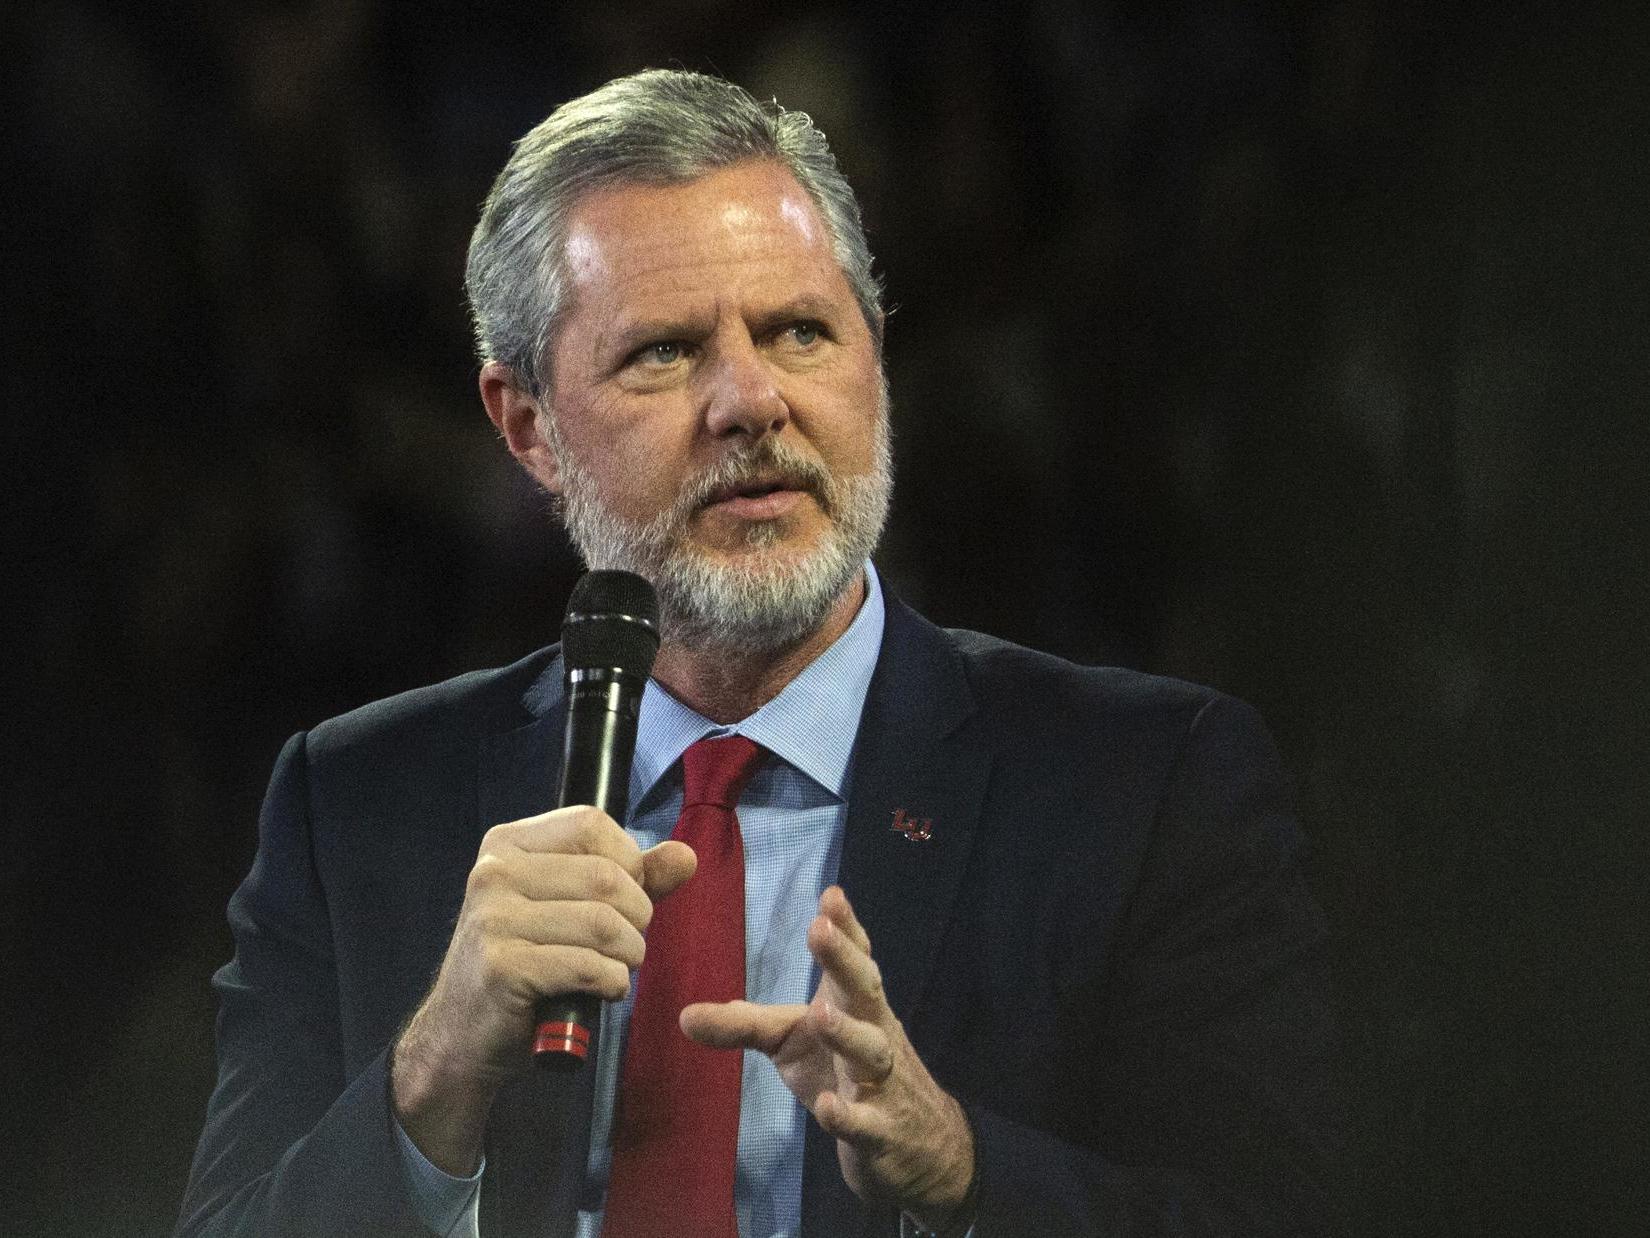 Mr Falwell, one of the country’s highest-profile evangelical Christians, announced that he would step down as the president of the university on Monday